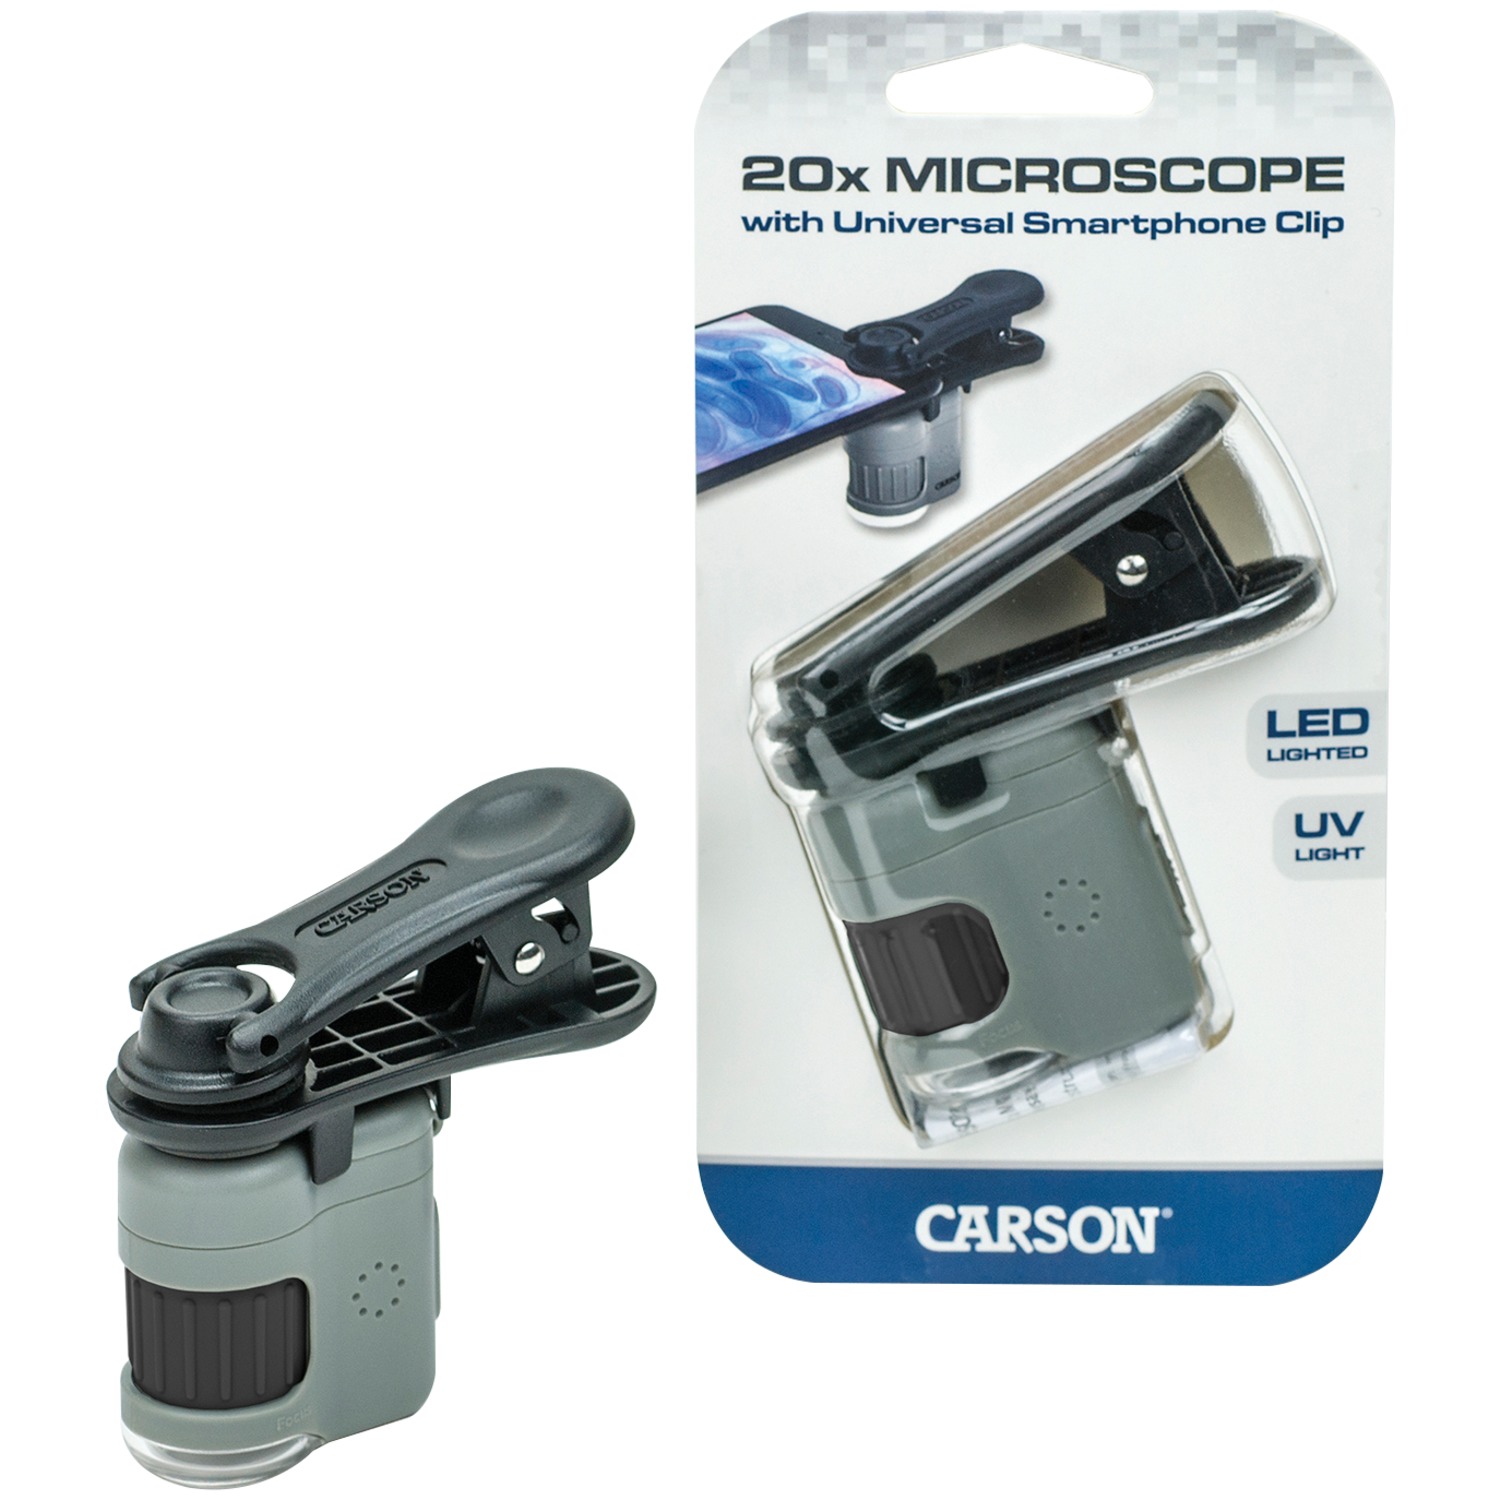 Carson MicroMini™ 20x LED Pocket Microscope with Universal Smartphone Clip - image 3 of 10